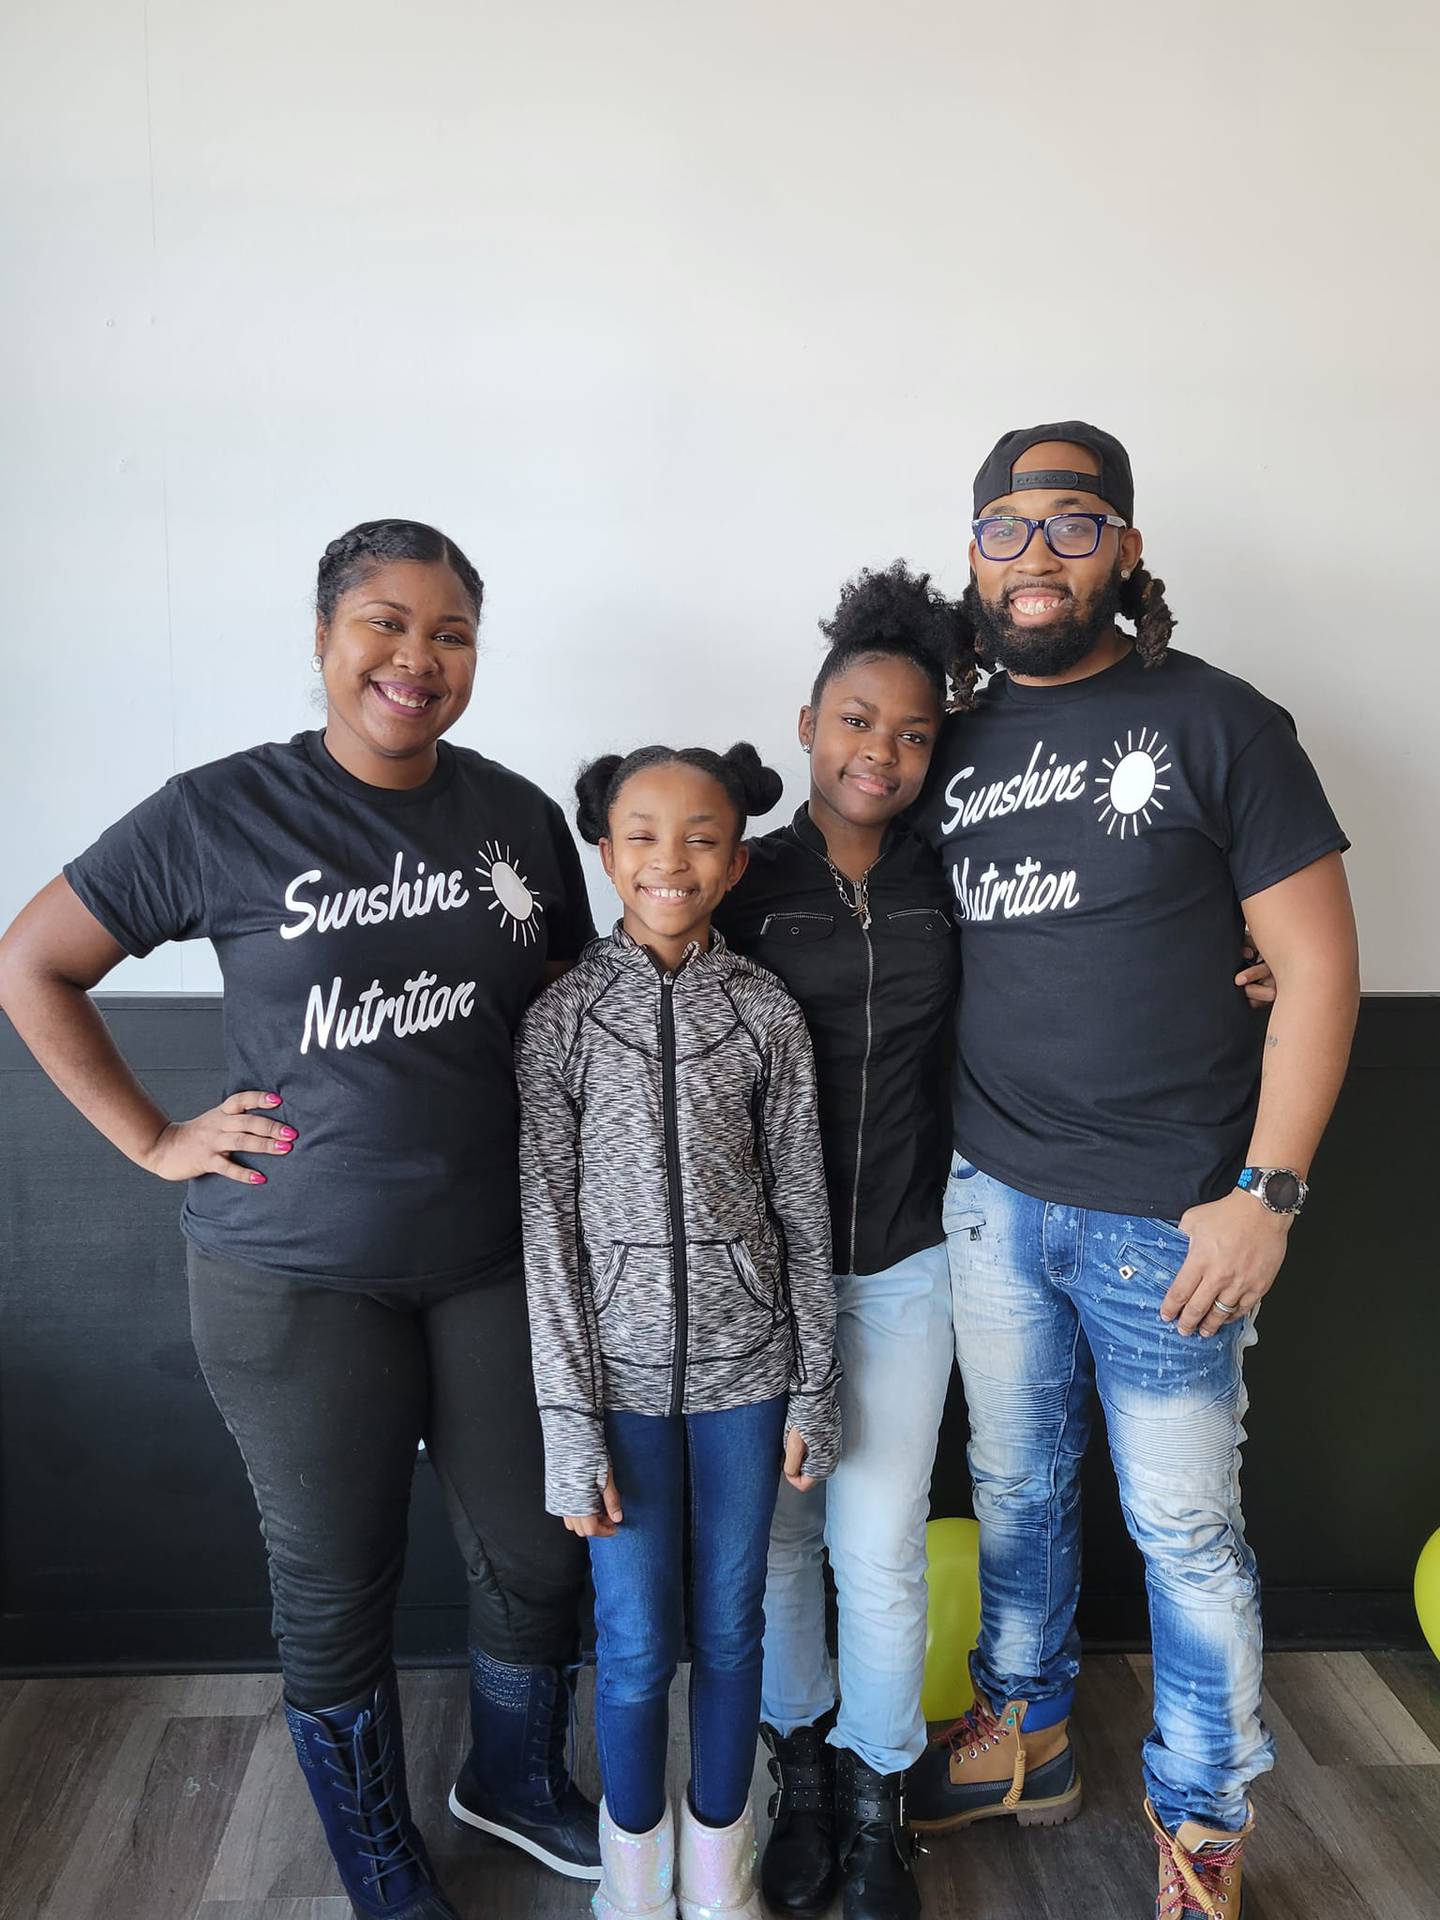 Pictured are the owners of Sunshine Nutrition in New Lenox, Lucky Collins (left) and Terry Collins (right) and their children Harmony Collins (left) and Serenity Collins (right).